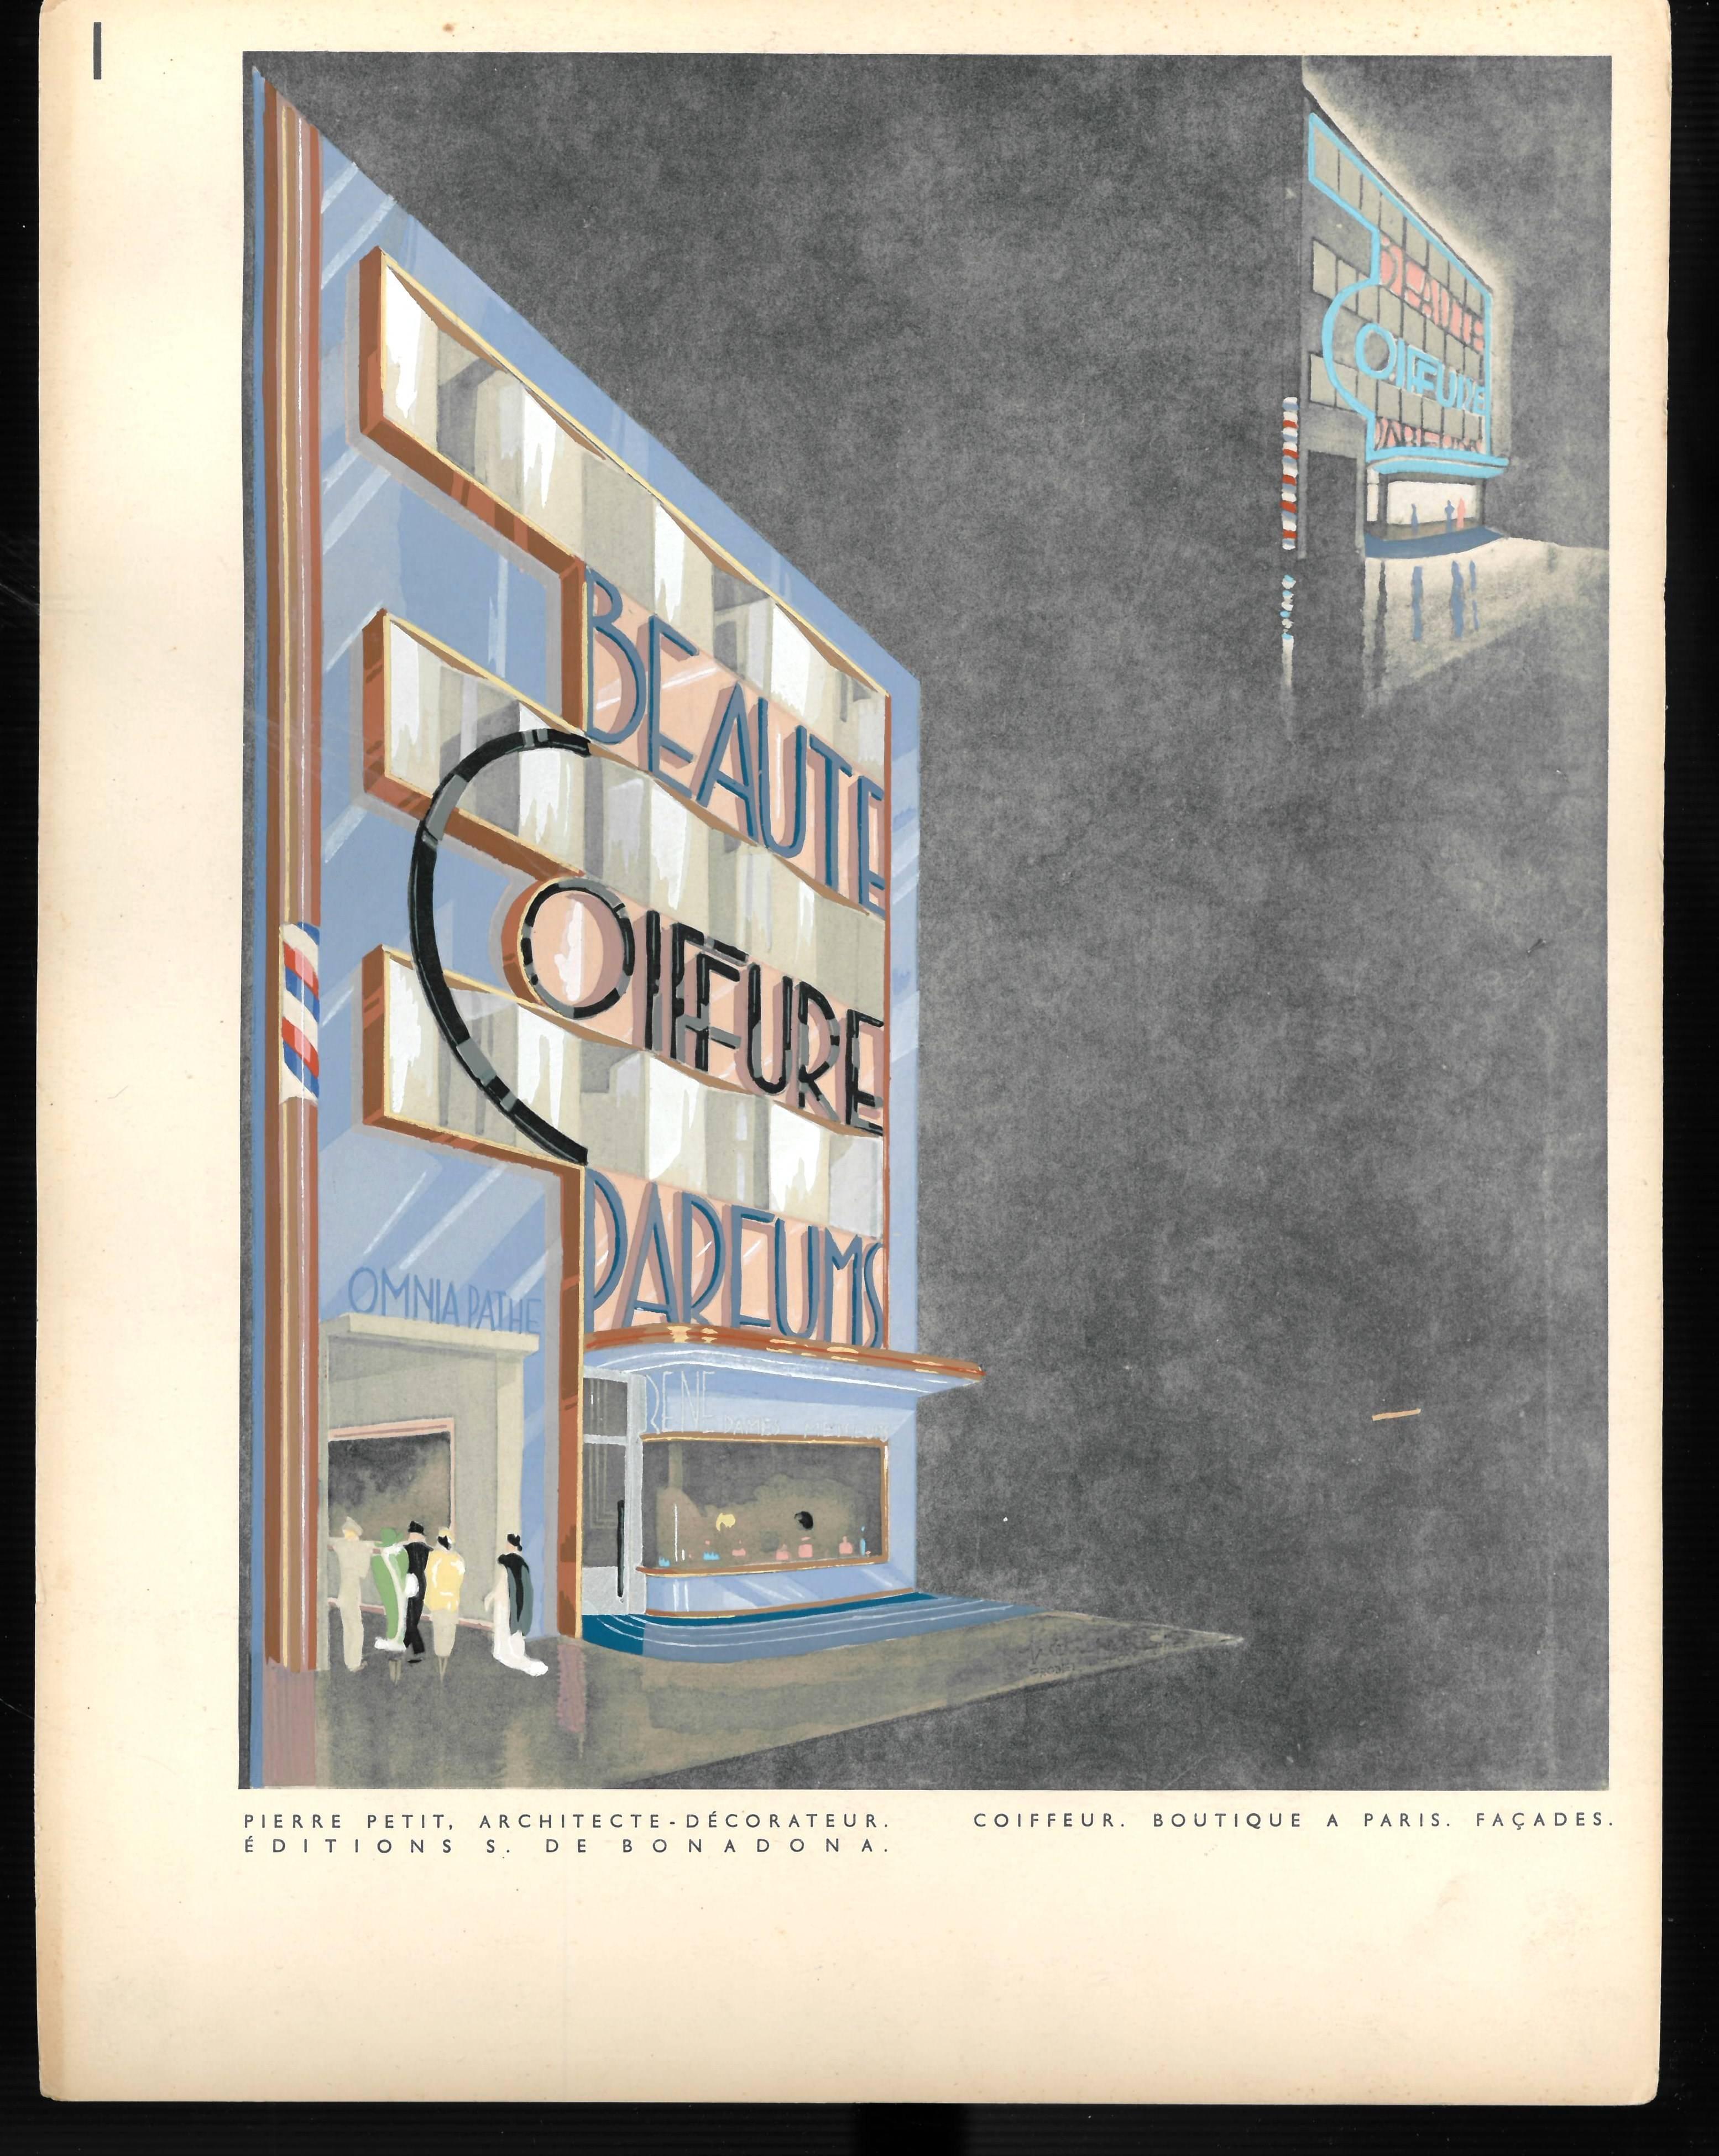 Published circa 1930, this is a portfolio containing 48 loose plates - 29 of which are colored in pochoir, the remainder are photographic images showing Parisian shop facades and interiors. Includes shoe shops, fashion boutiques, a book shop, bars